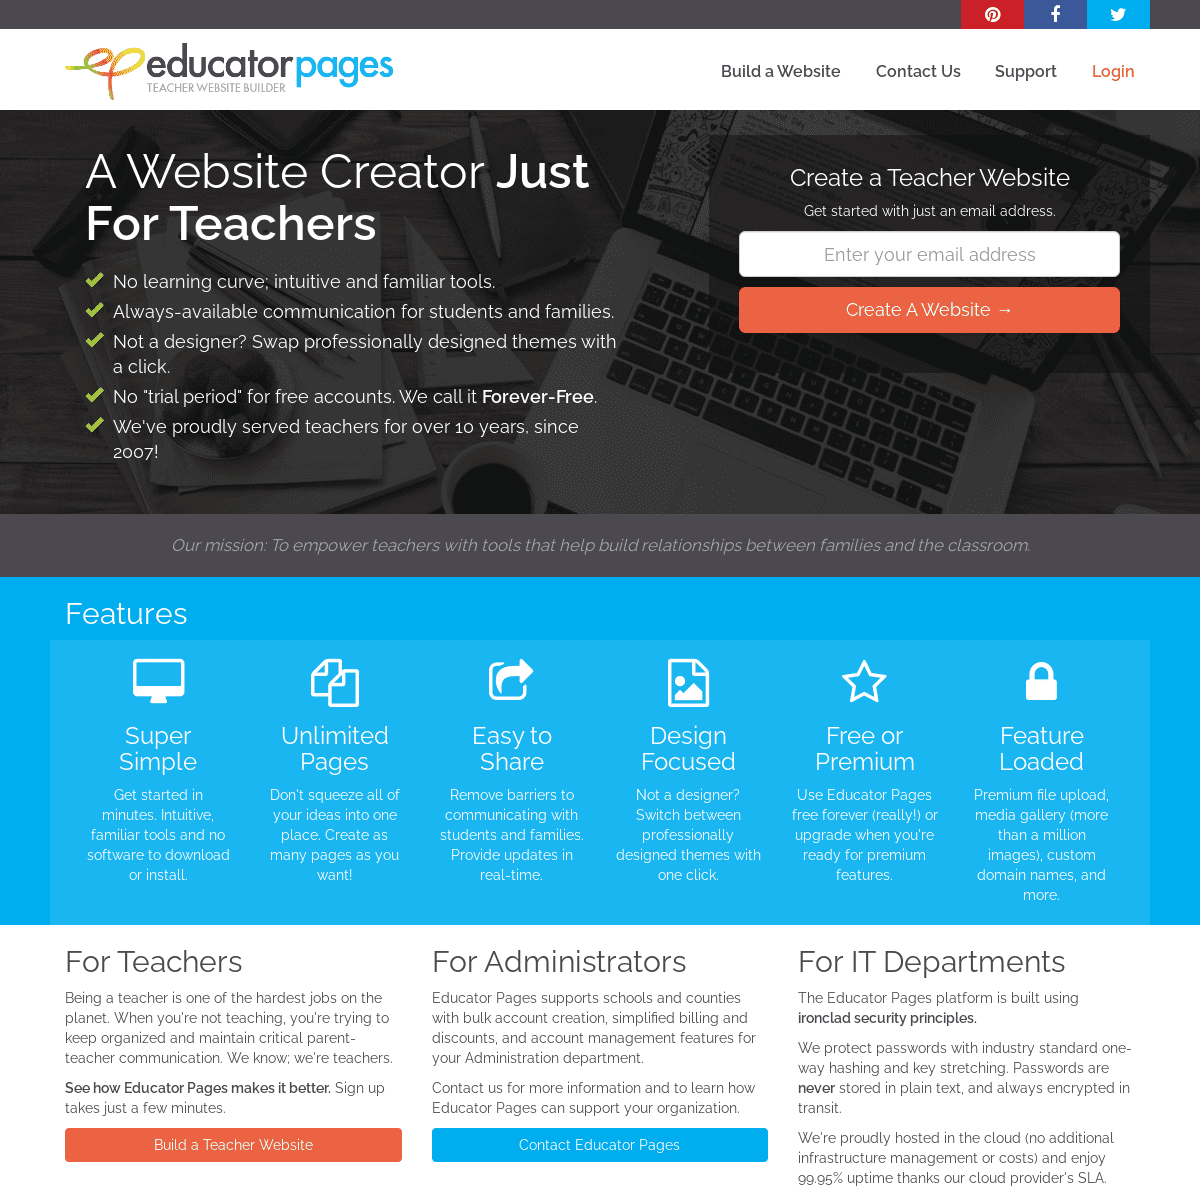 A complete backup of https://educatorpages.com